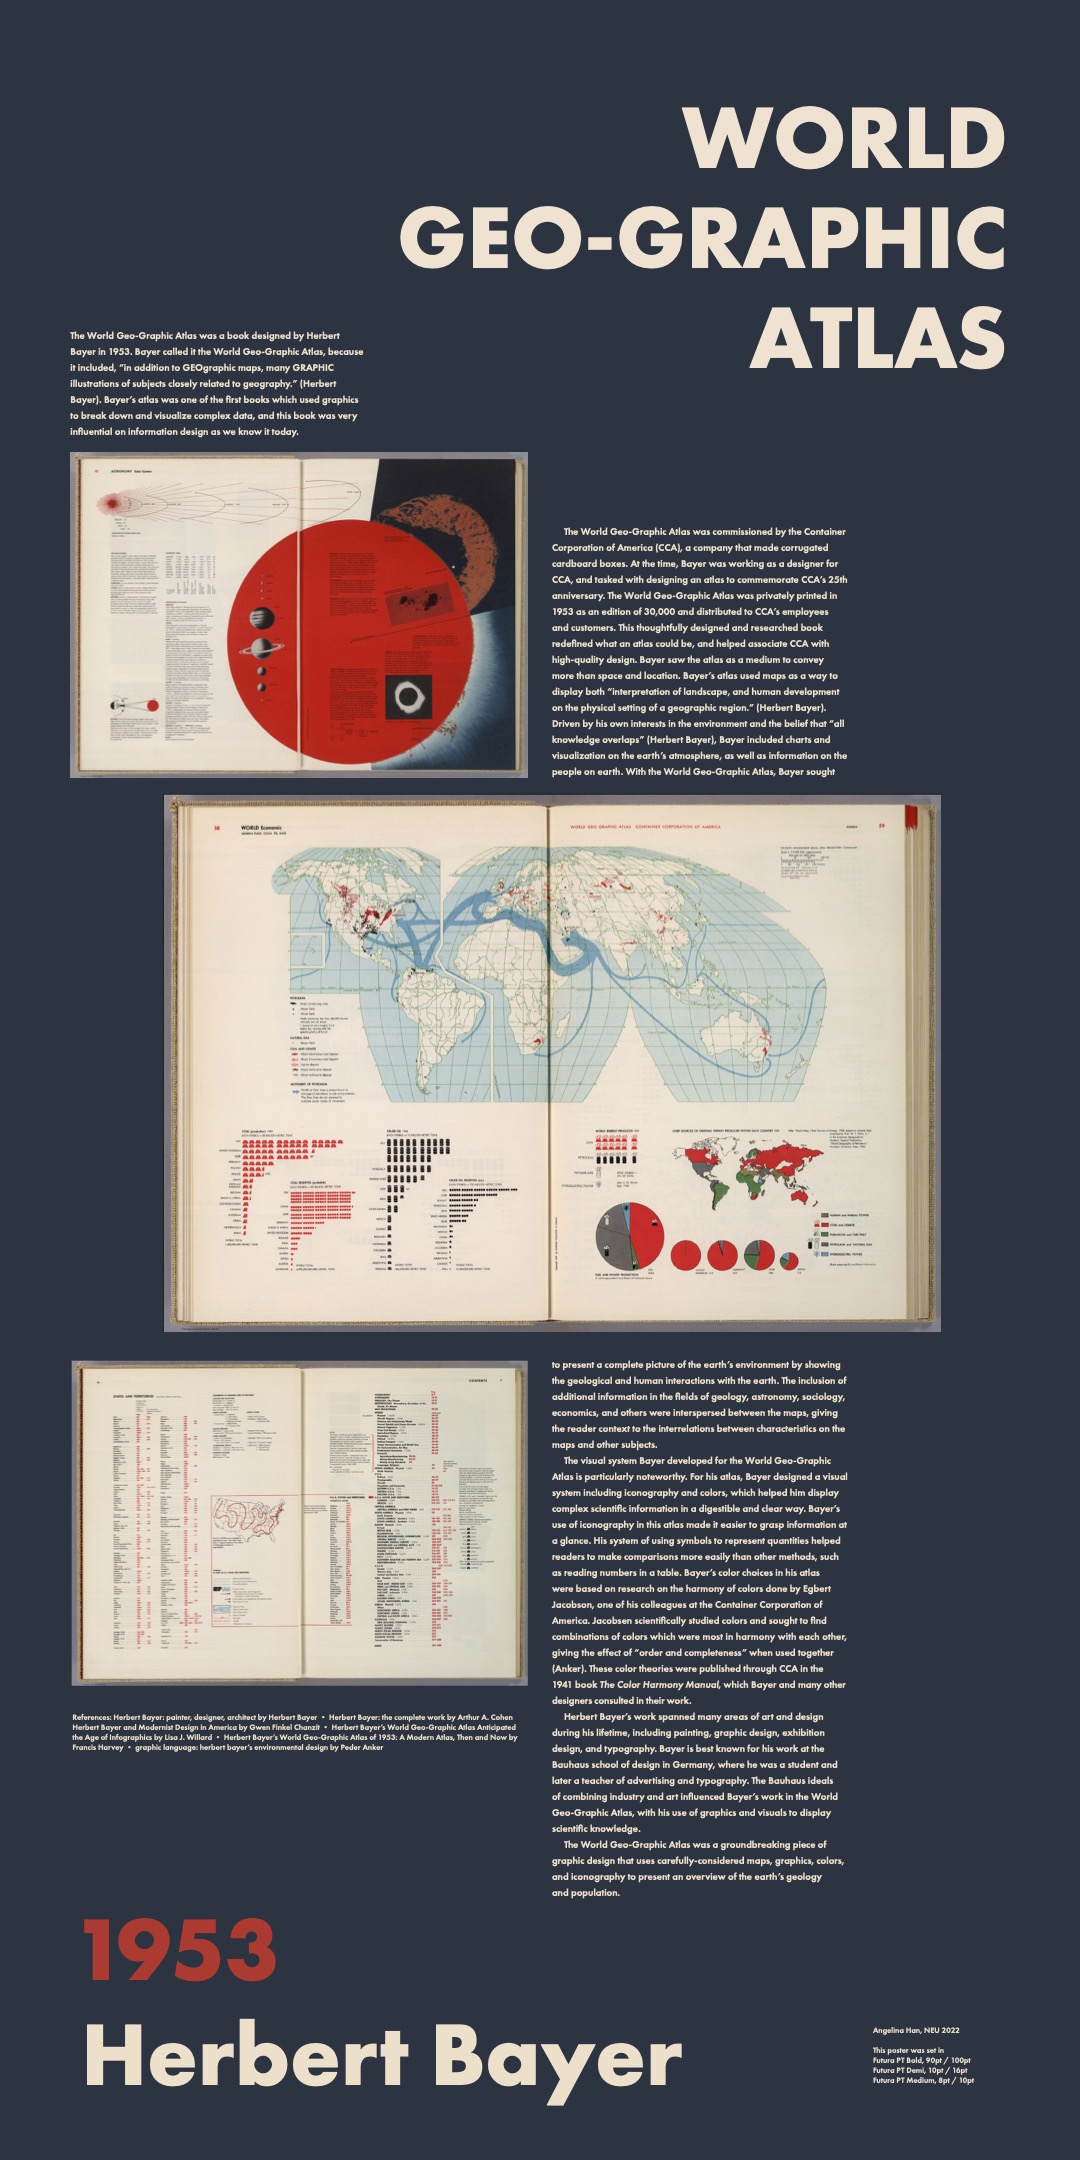 poster with the words 'World Geo-Graphic Atlas' written in the top right corner, and '1953 Herbert Bayer' in the bottom left corner. 
            The background is dark blue and three scans of a book showing maps and charts are laid out next to informational text about the book.